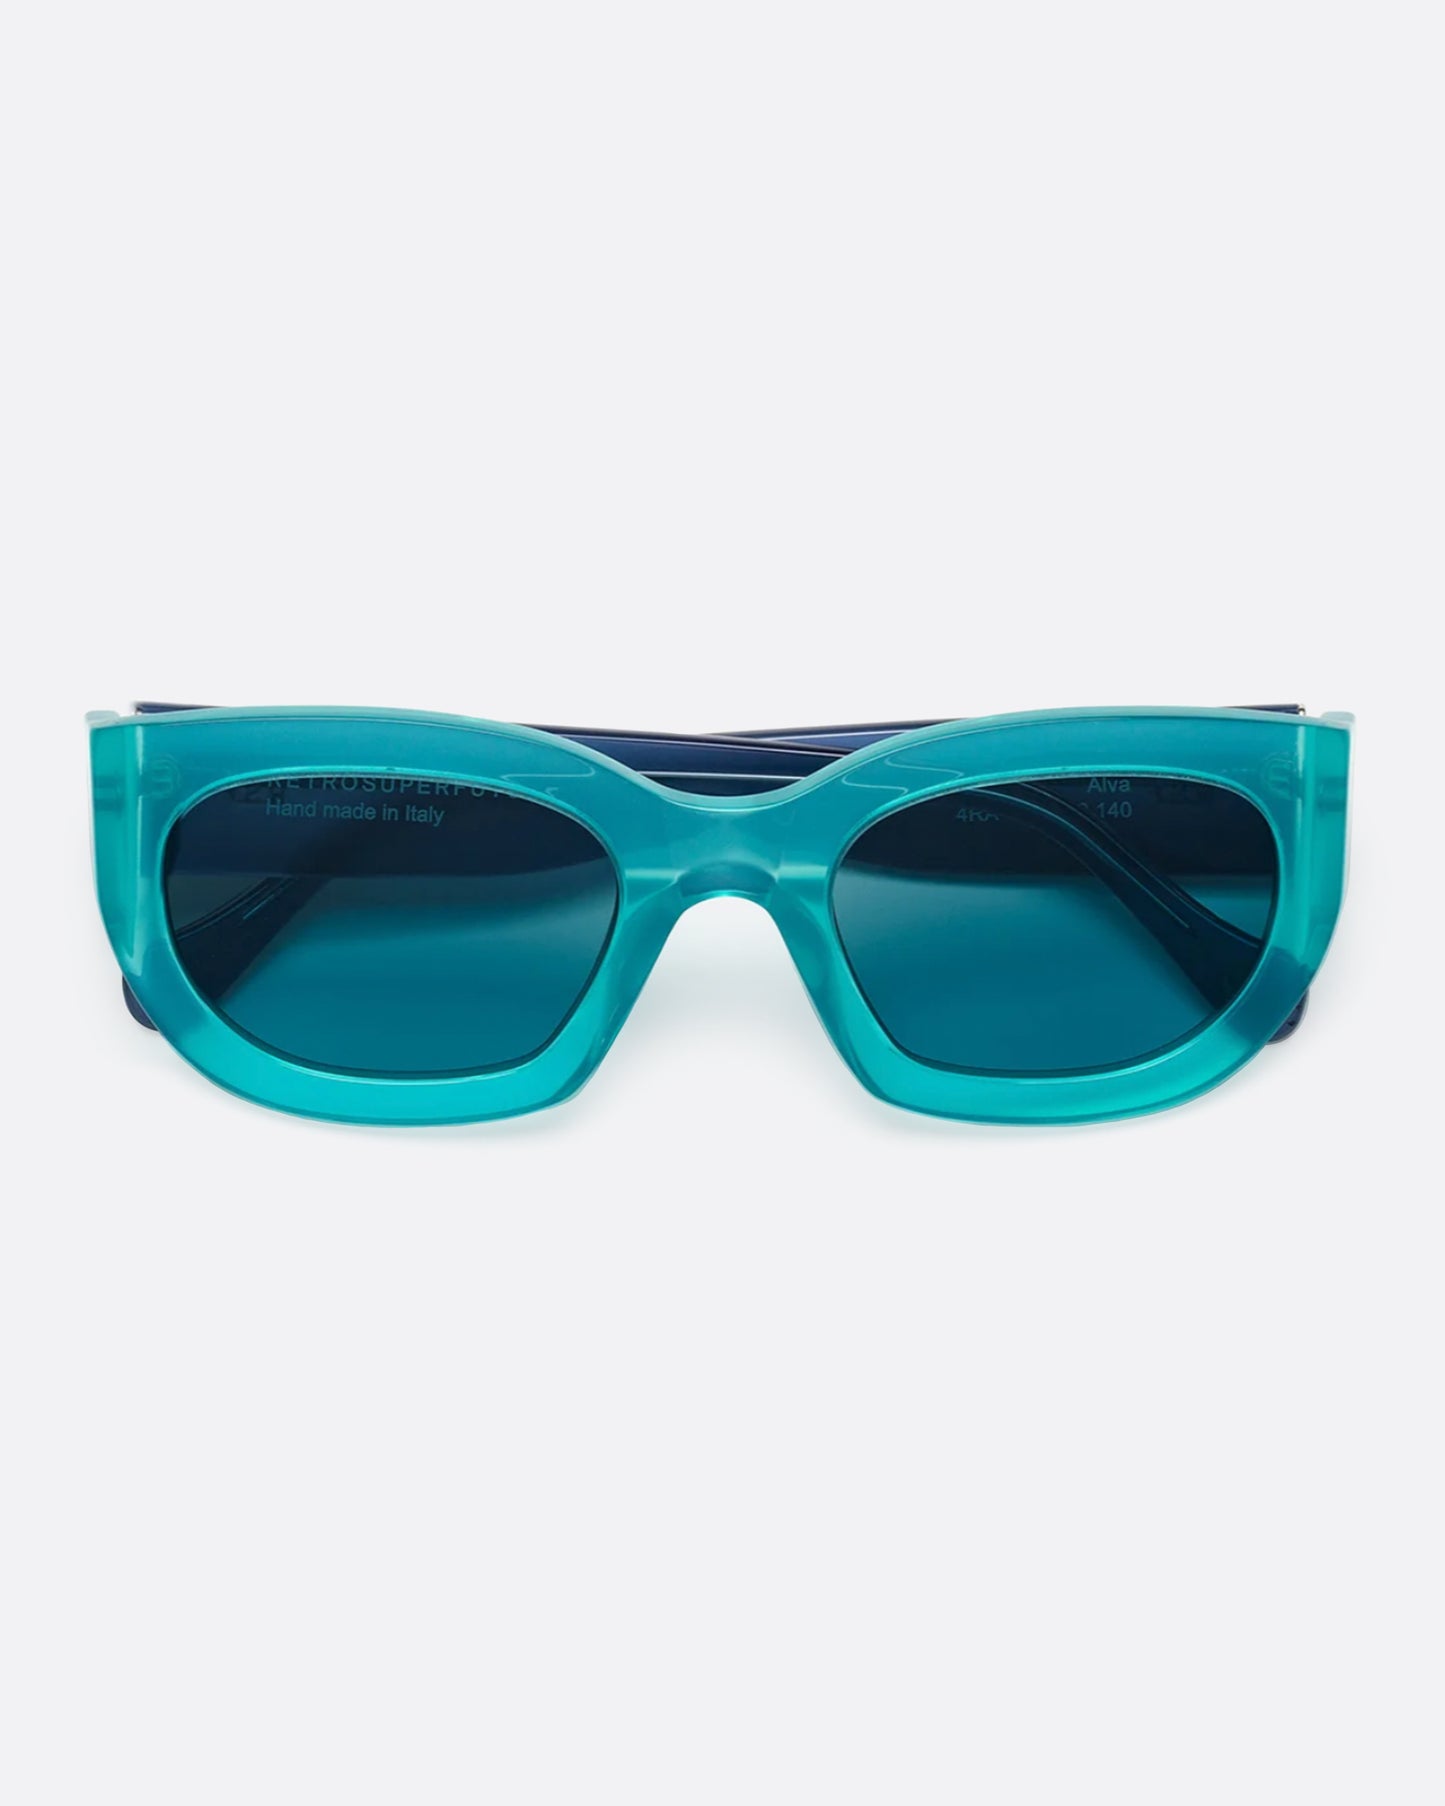 These sunglasses will take you from sunny beaches to busy city streets.